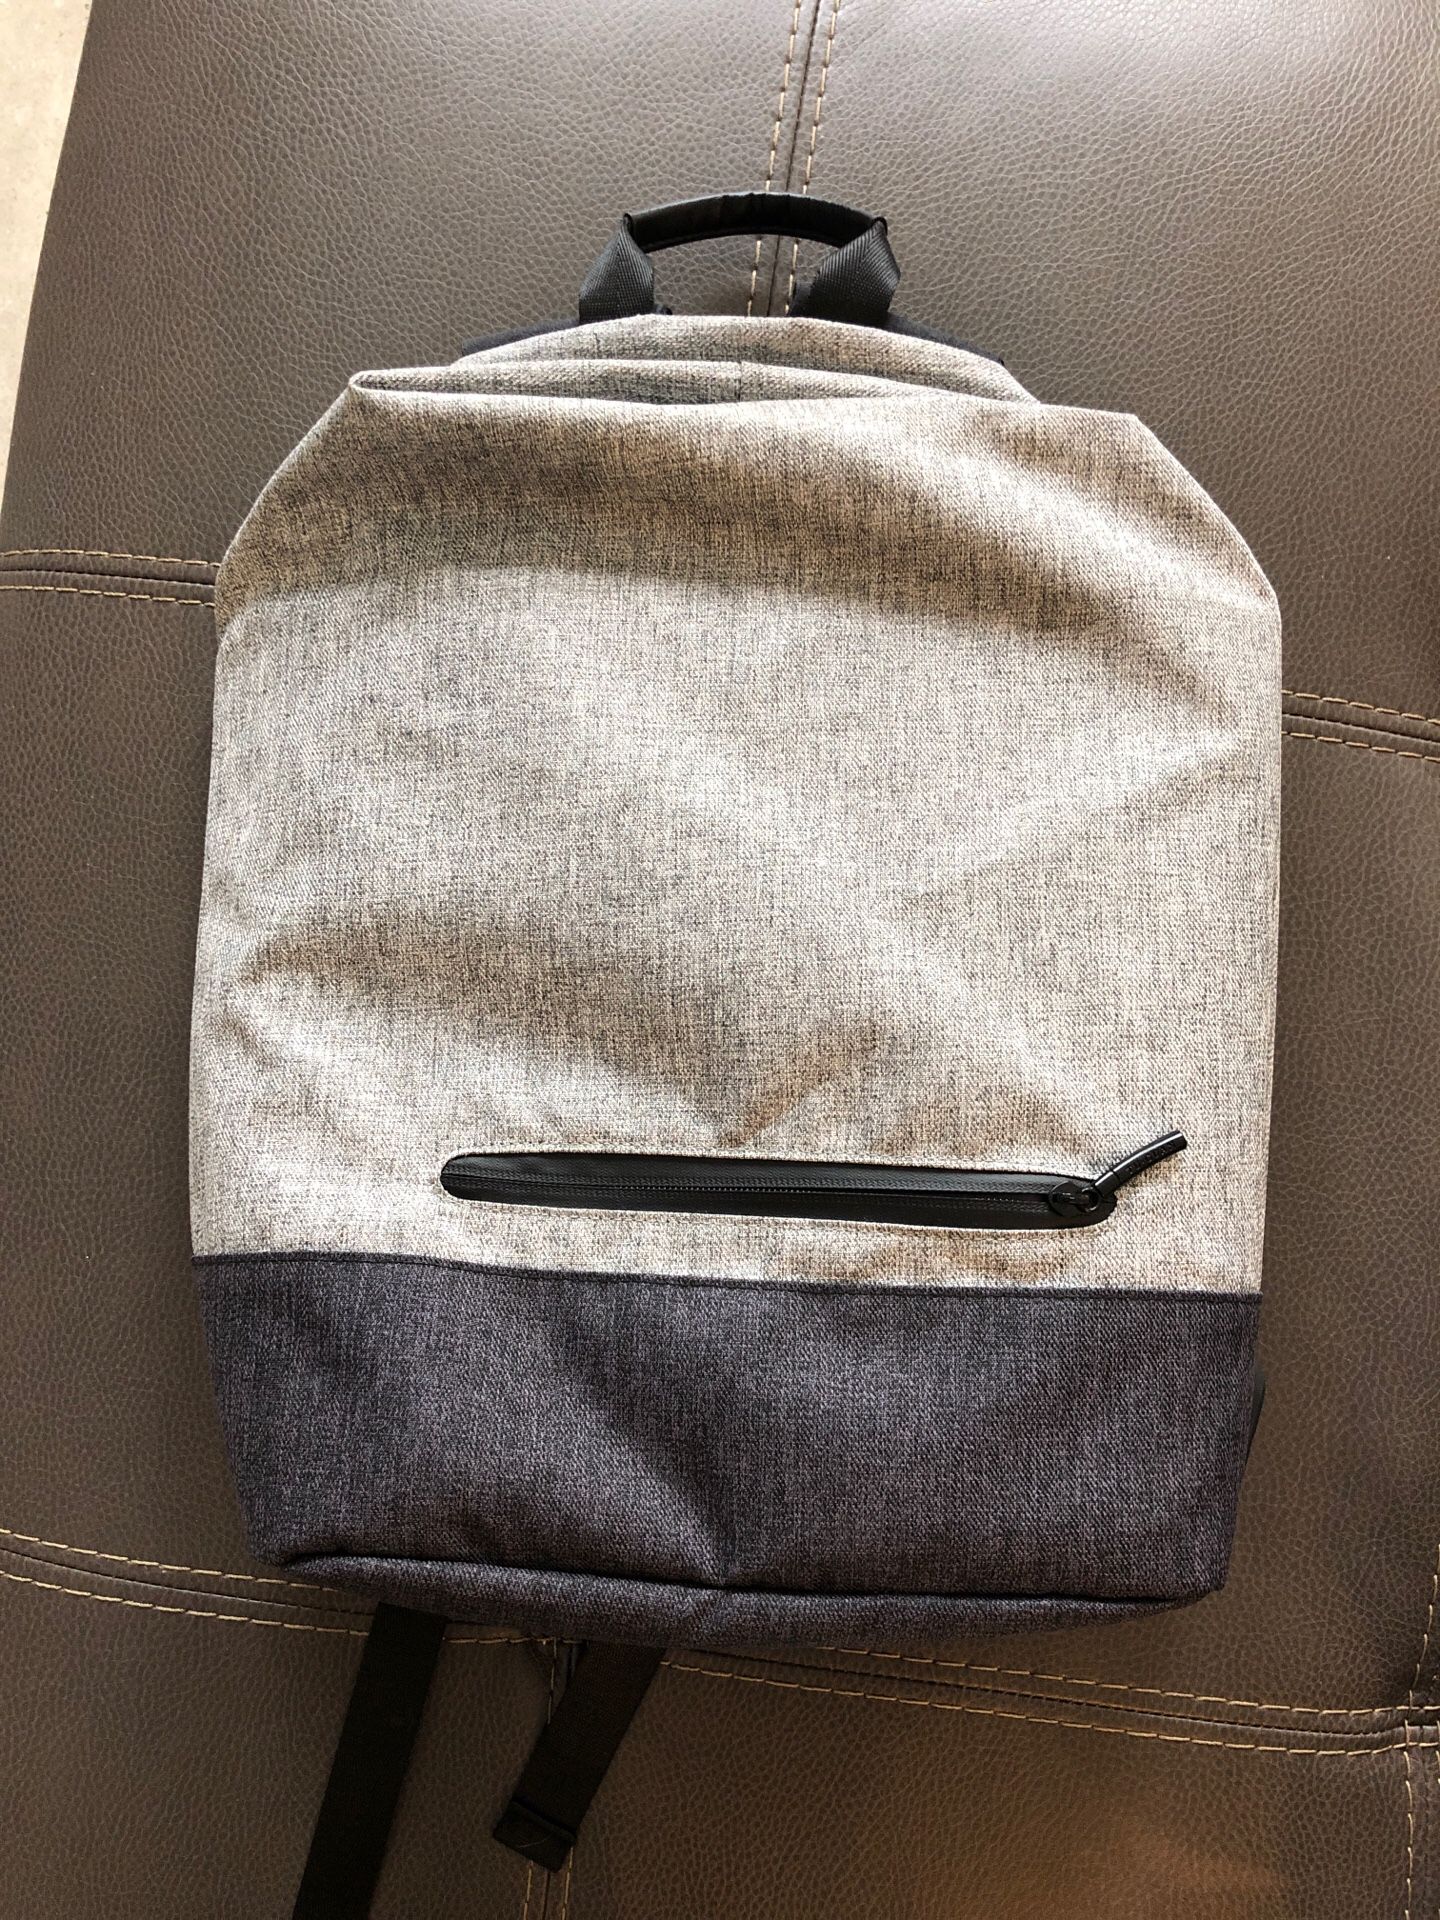 Gray Laptop Computer backpack.